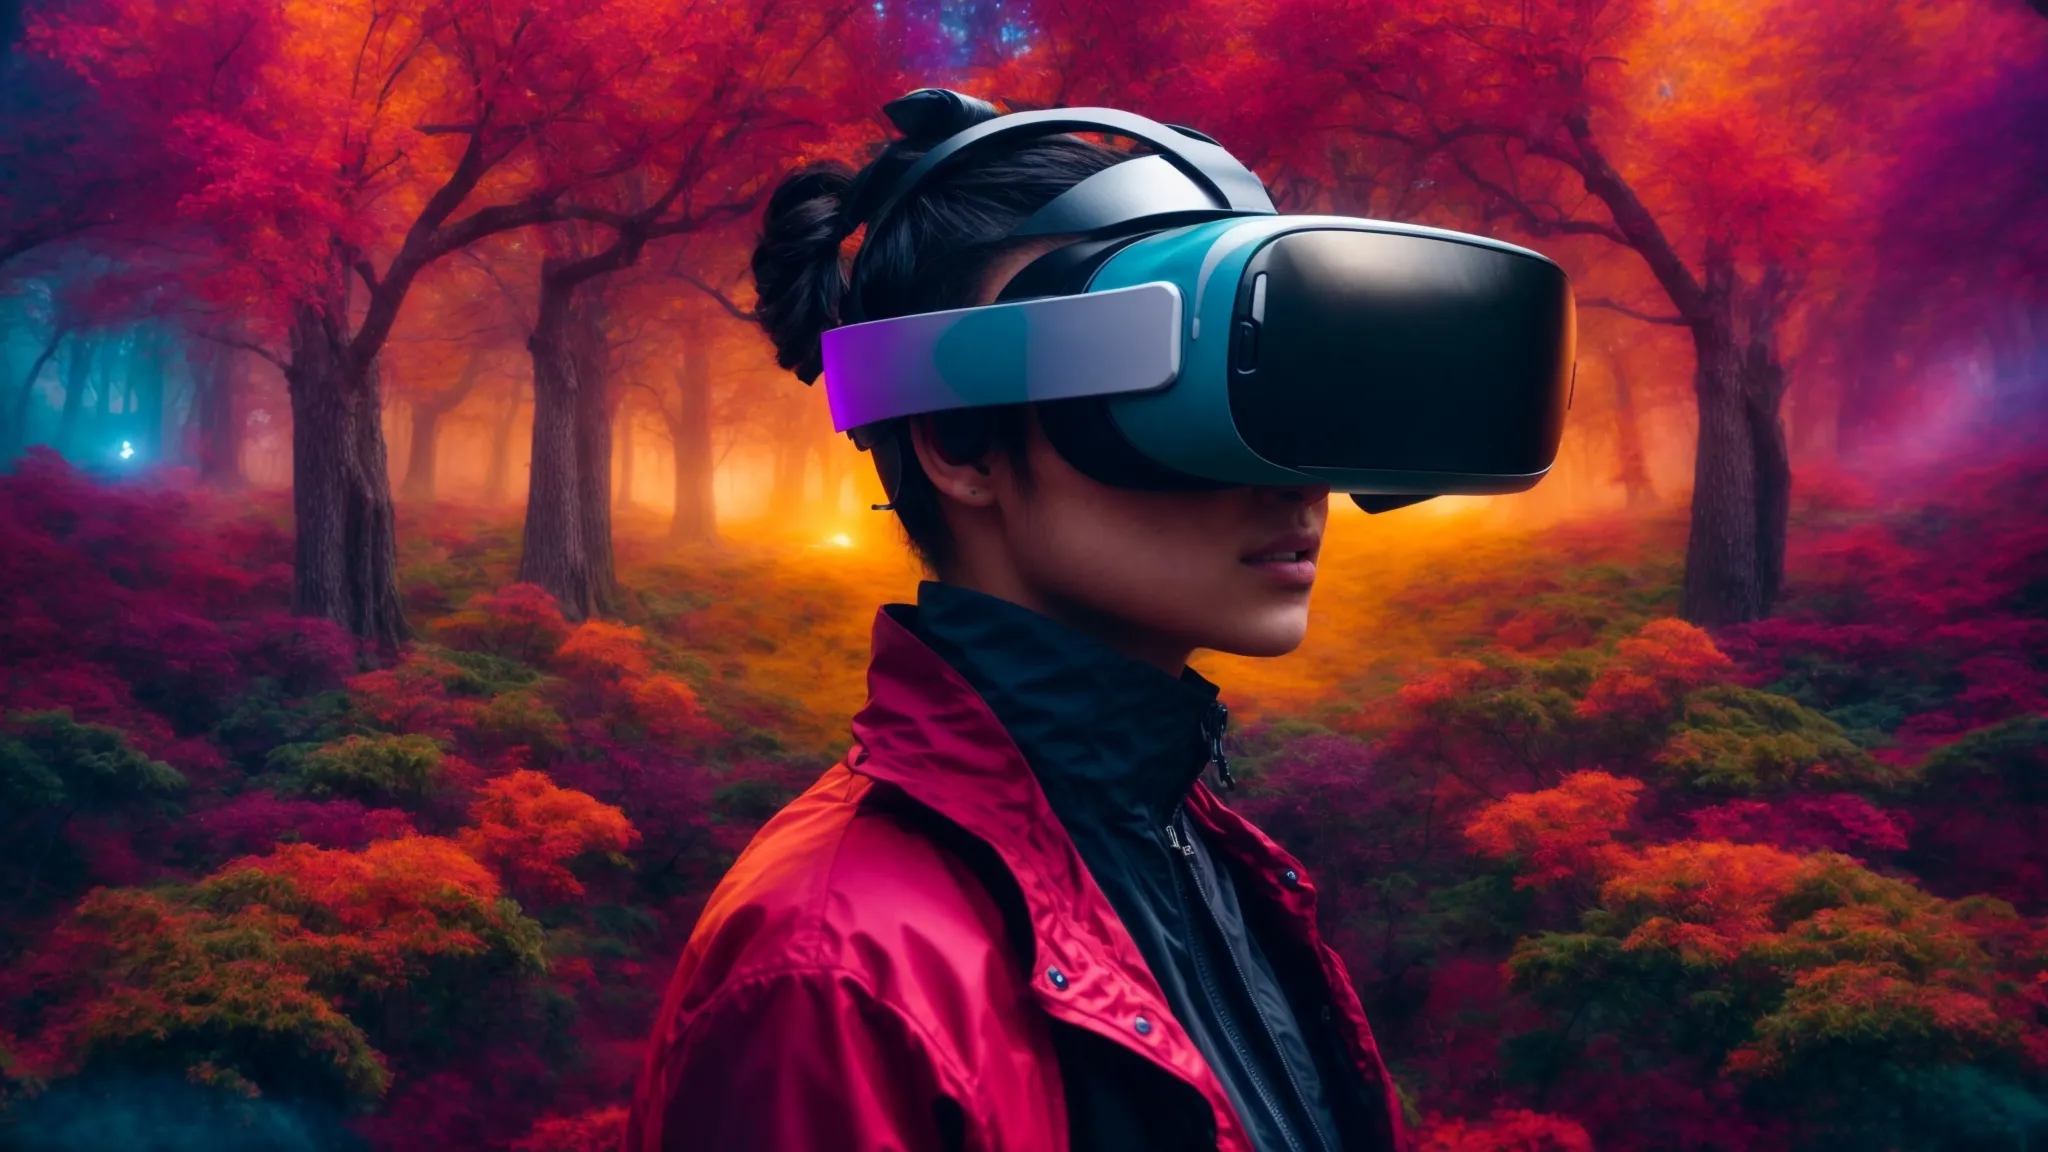 a person wearing a vr headset is immersed in a digital landscape, with vivid colors and futuristic elements enveloping them.